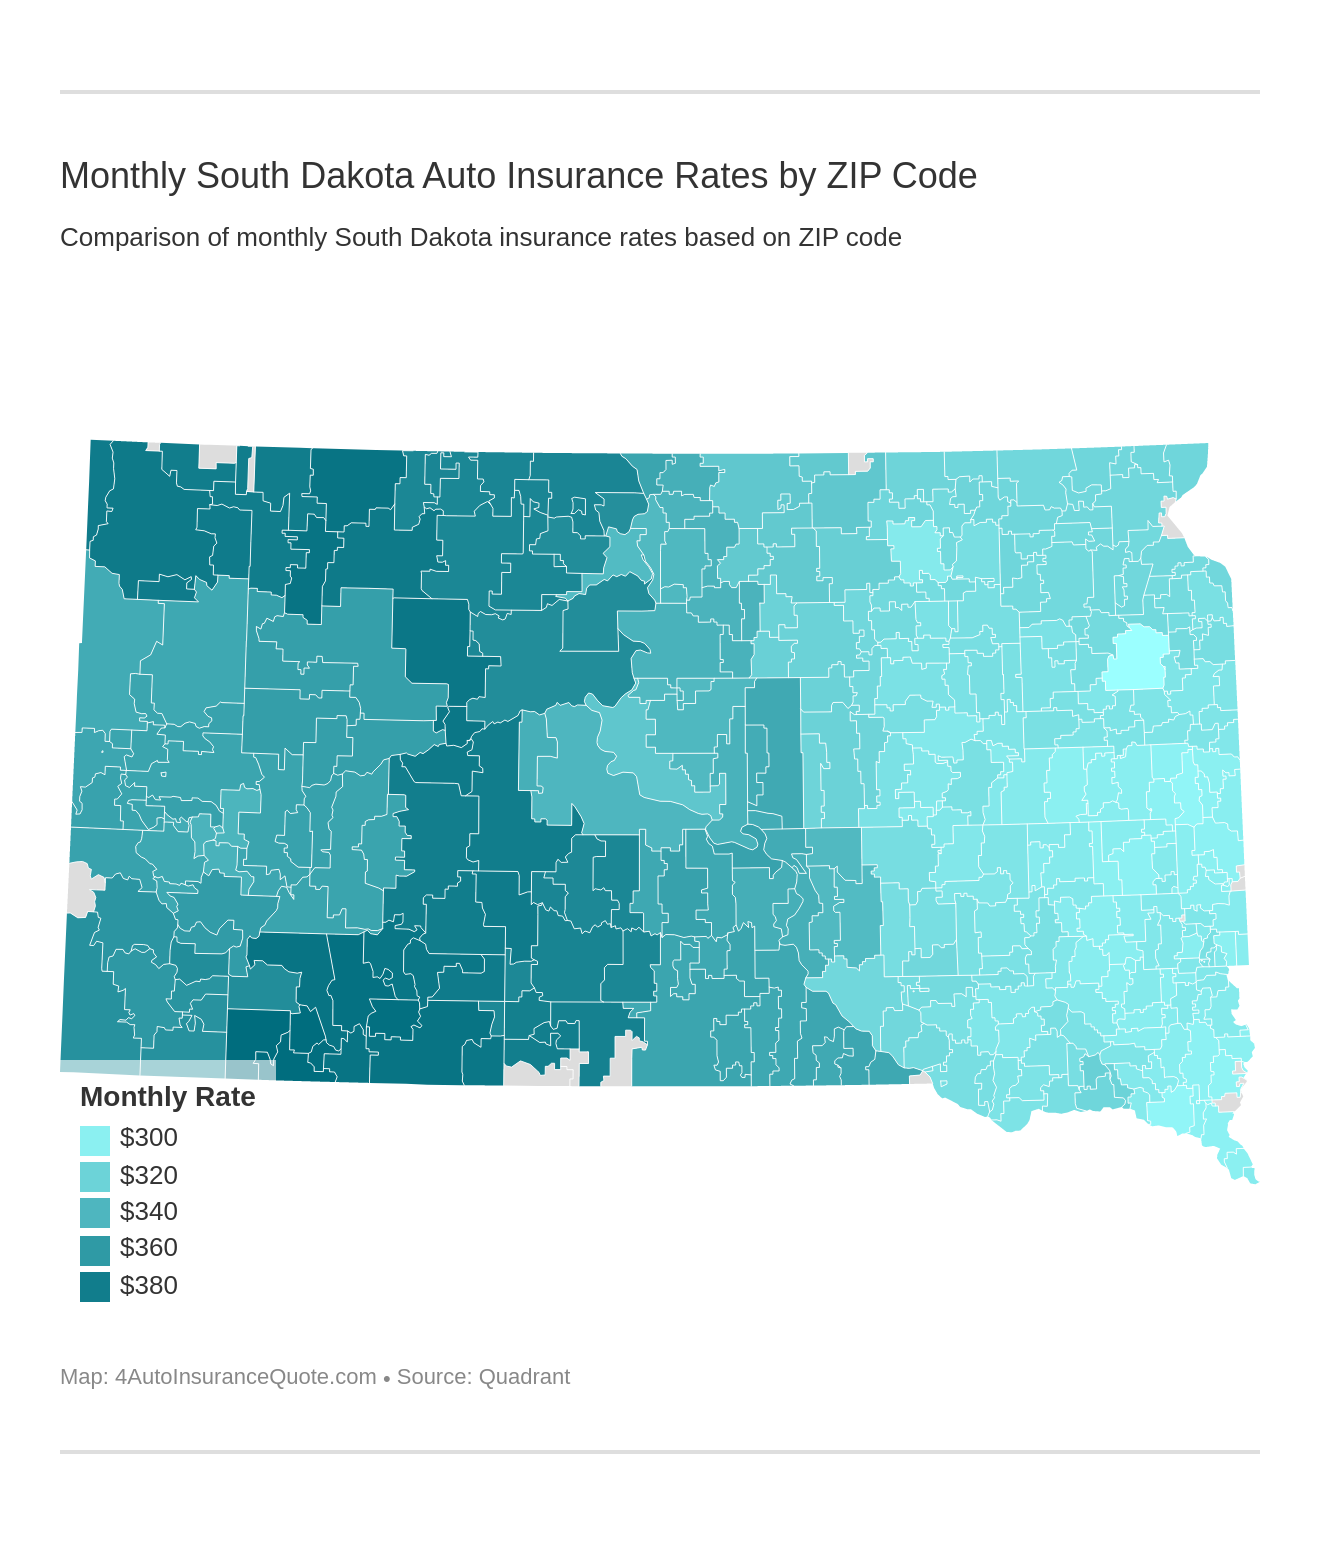 Monthly South Dakota Auto Insurance Rates by ZIP Code